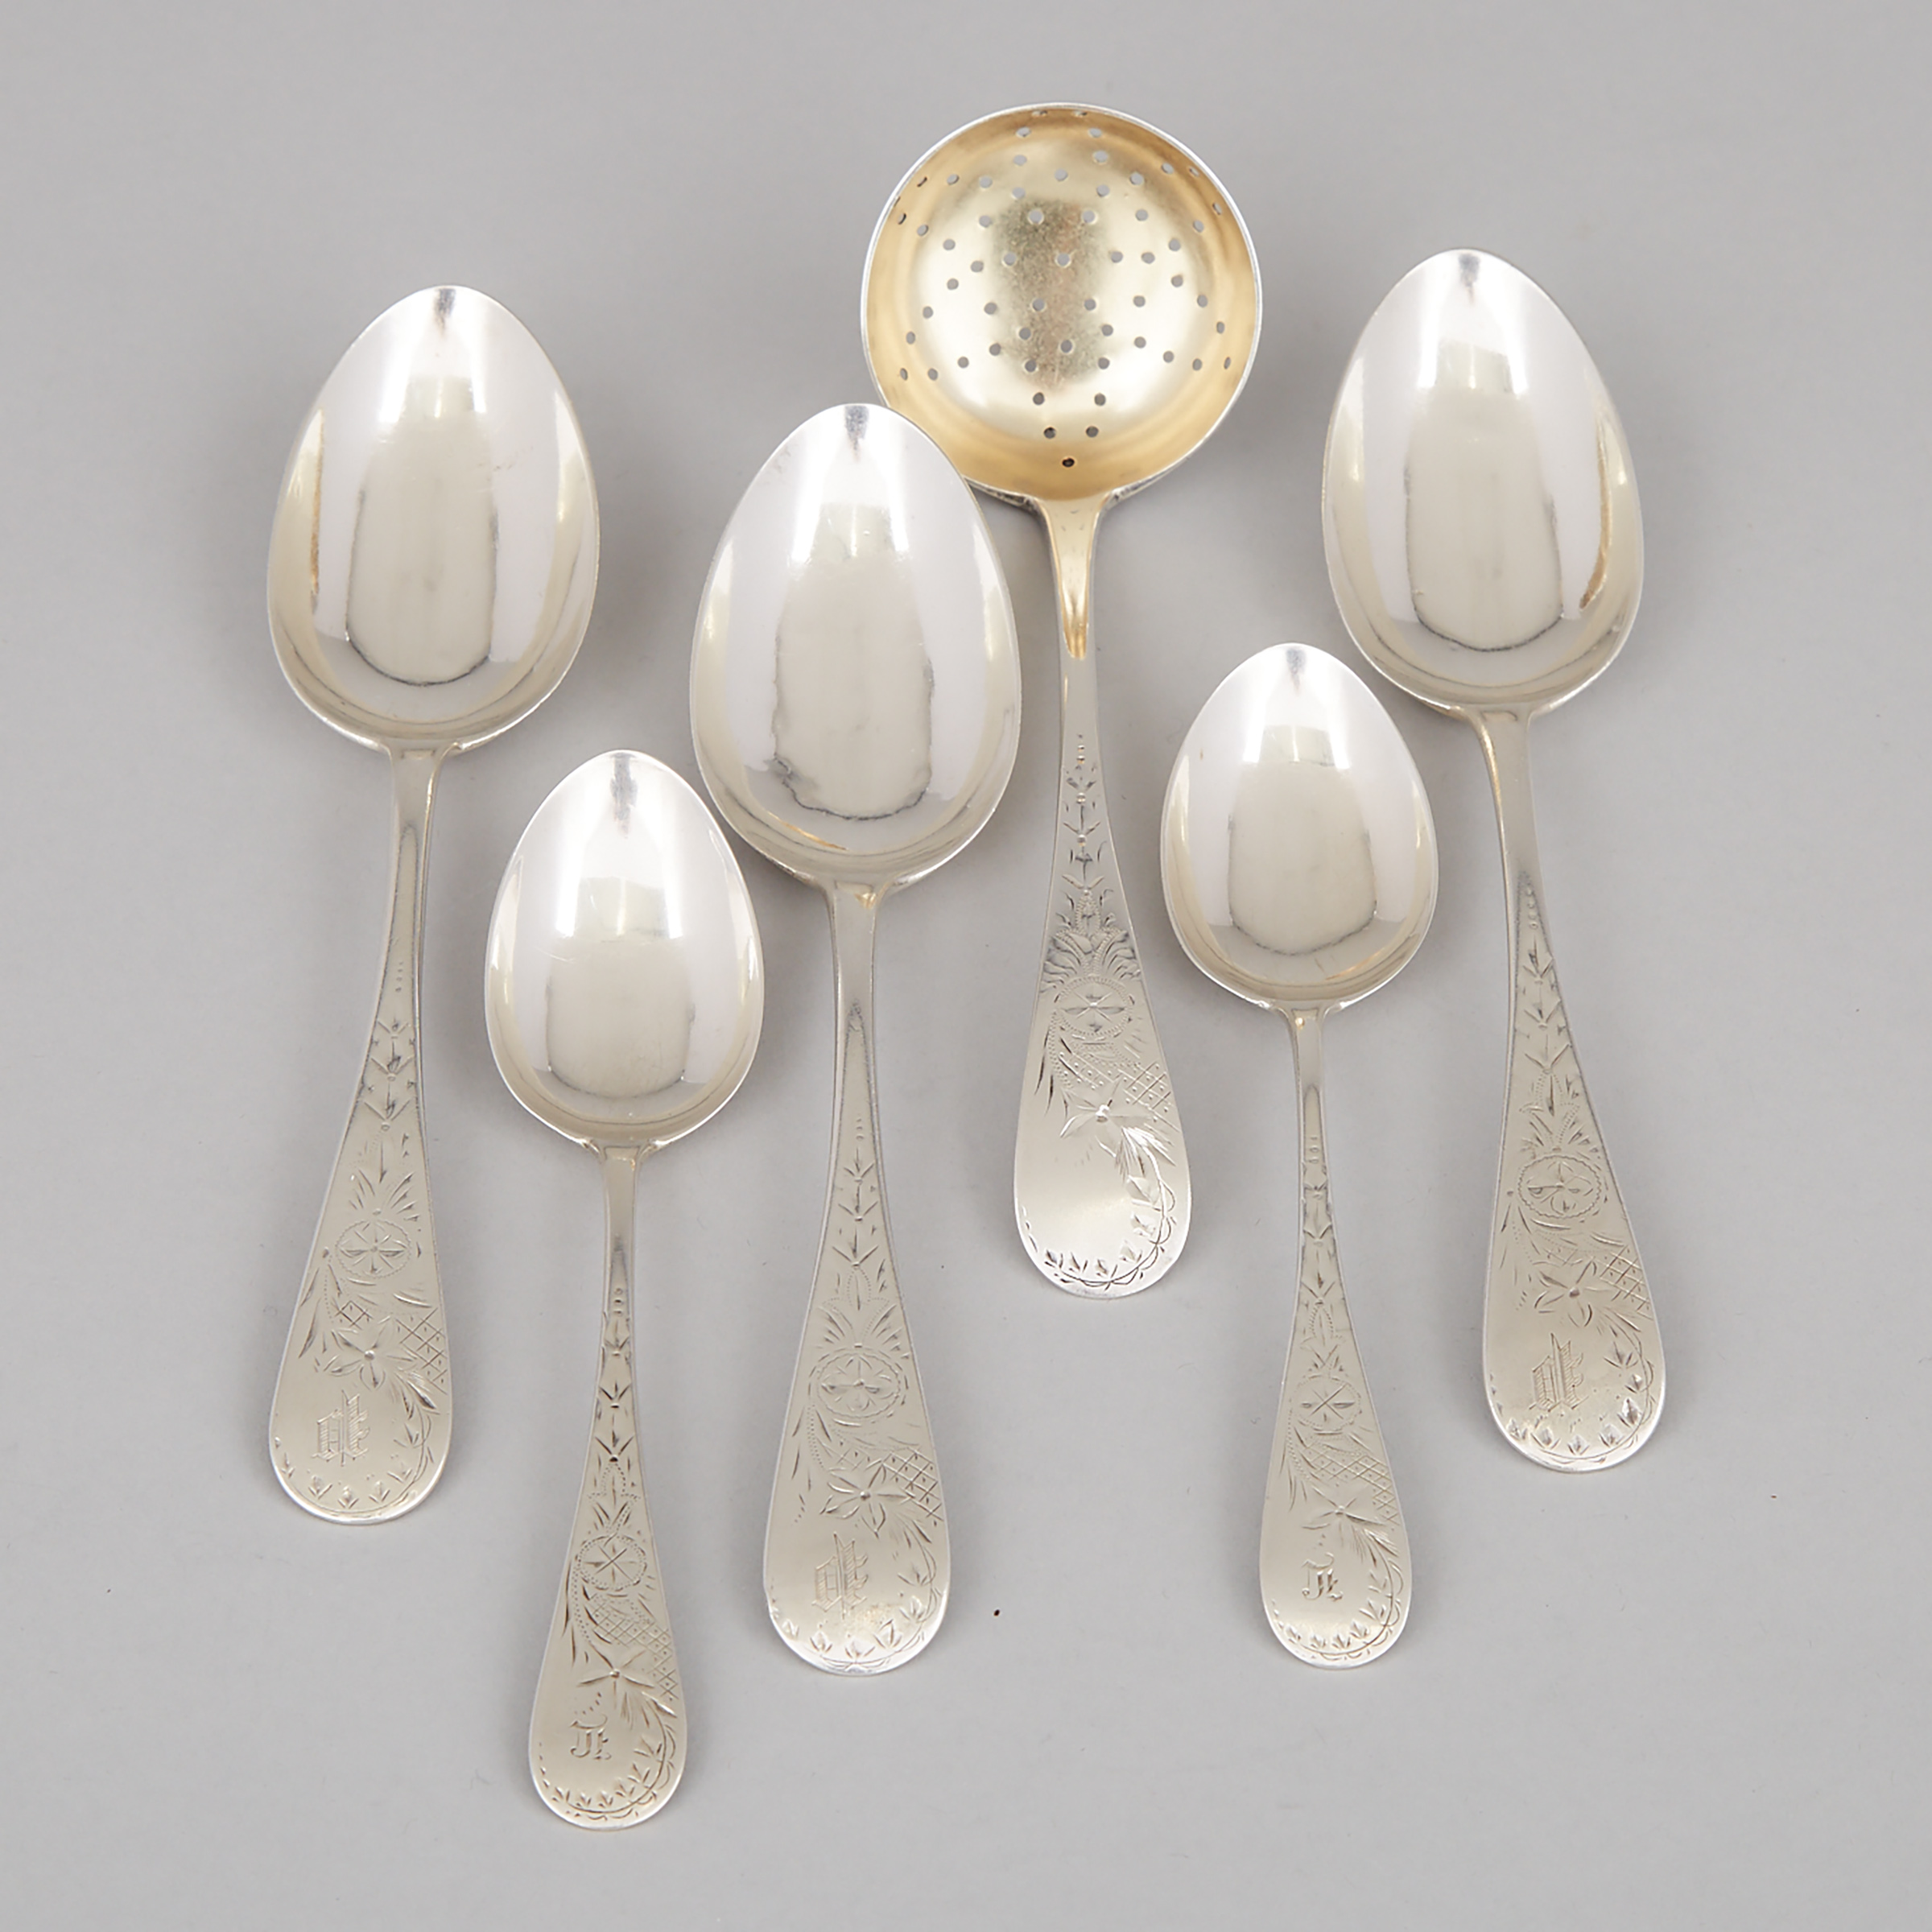 Three Canadian Silver Engraved Old English Pattern Dessert Spoons, Two Tea Spoons and a Sugar Sifter, Hendery & Leslie for Henry Birks & Sons, Montreal, Que., c.1880-97